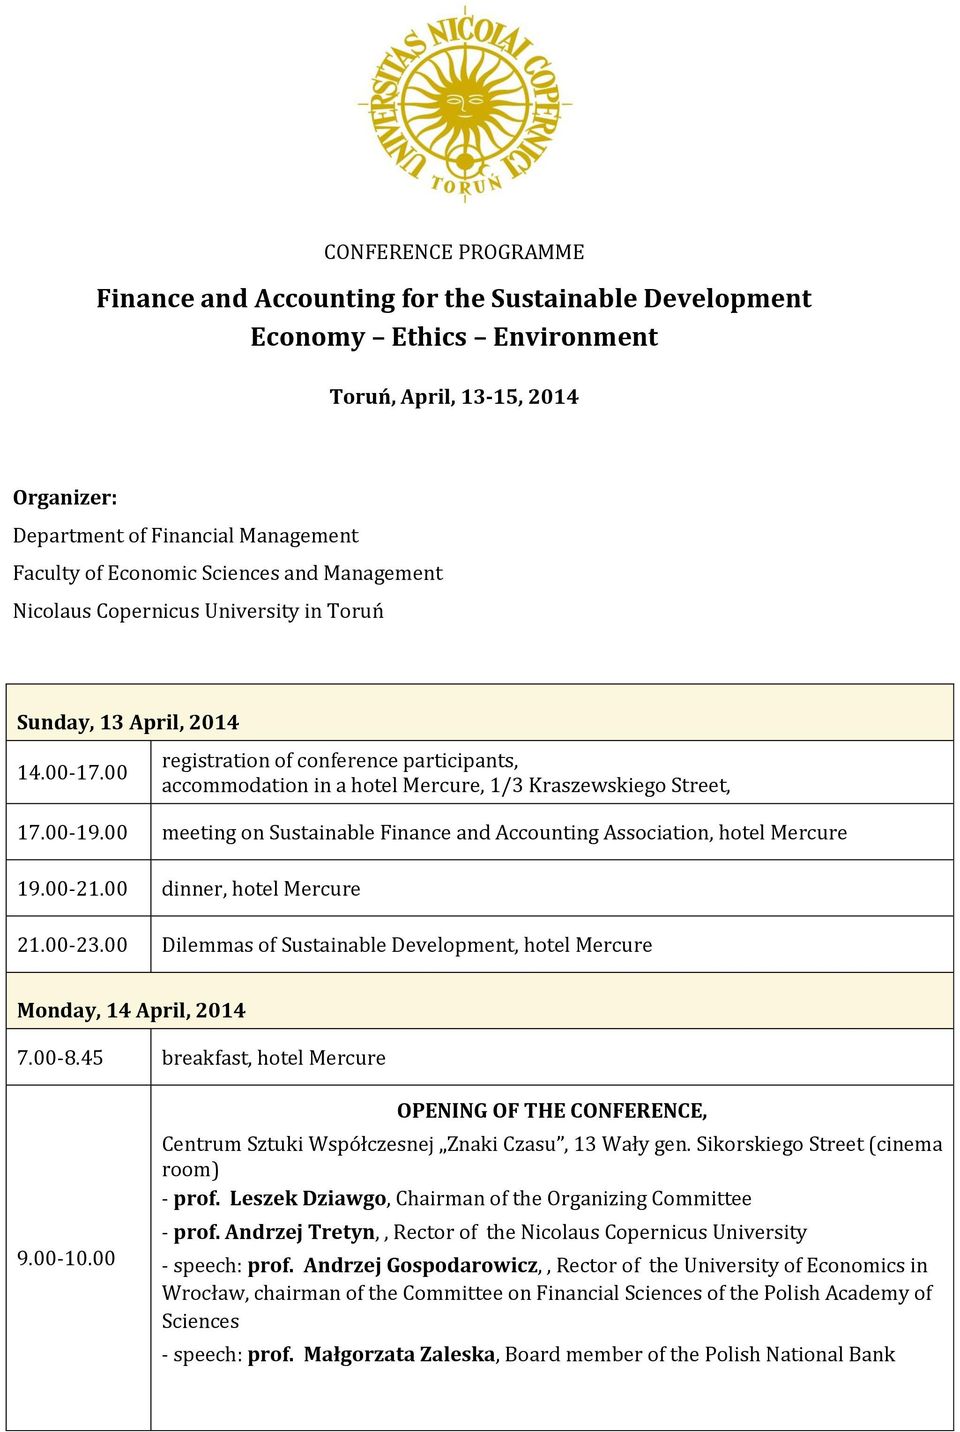 00 registration of conference participants, accommodation in a hotel Mercure, 1/3 Kraszewskiego Street, 17.00-19.00 meeting on Sustainable Finance and Accounting Association, hotel Mercure 19.00-21.